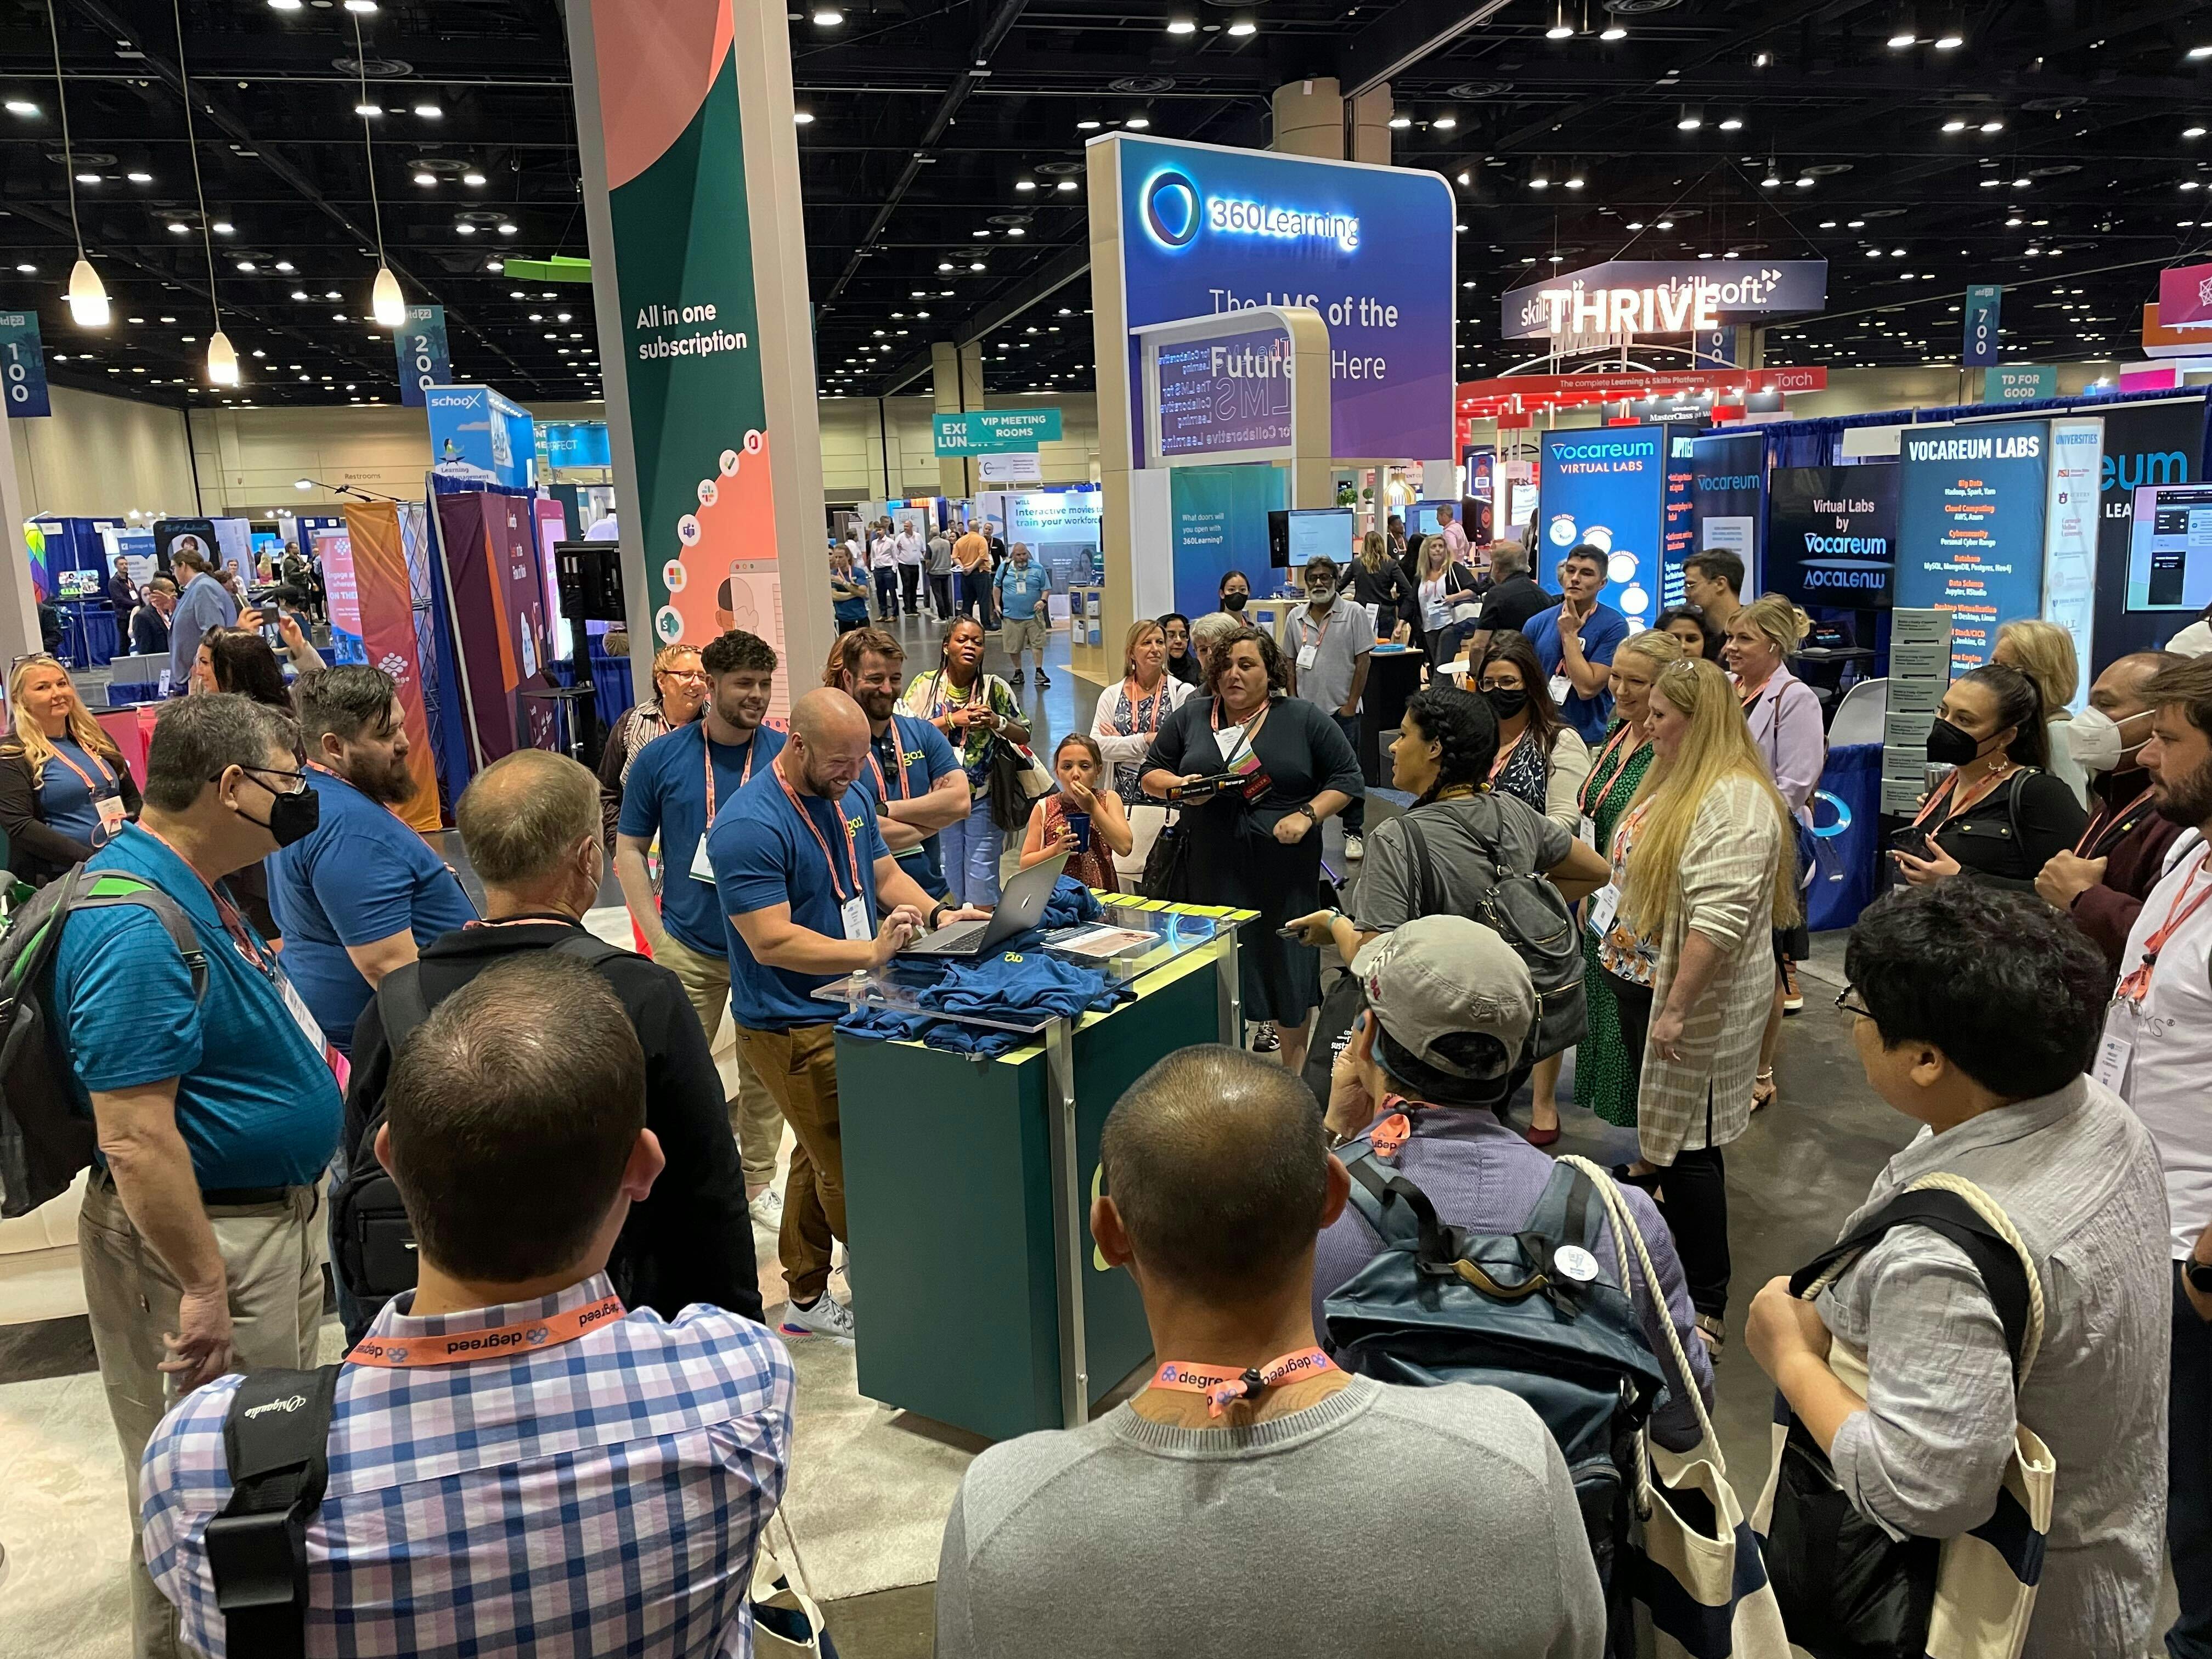 A packed Go1 booth during the announcement of our iPad giveaway winner